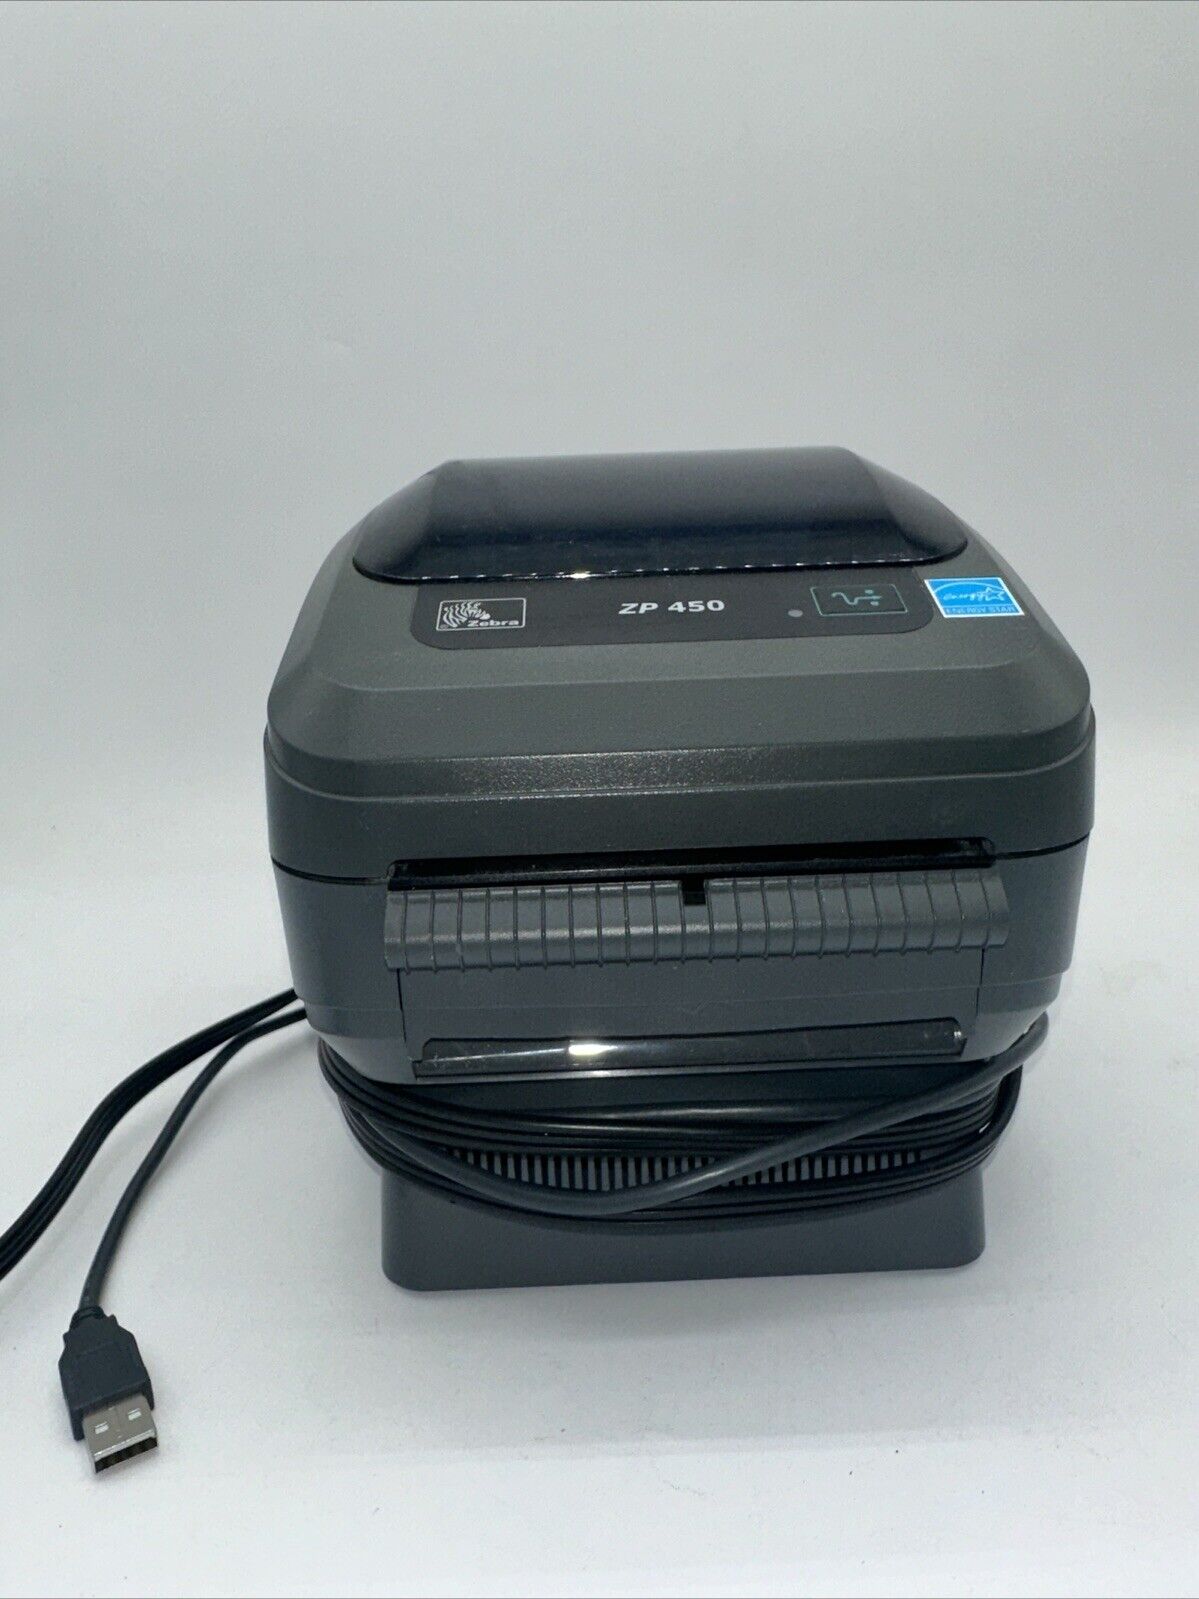 Zebra ZP 450 ZP450-0101-0000 Thermal Label Printer With Power Cable And USB